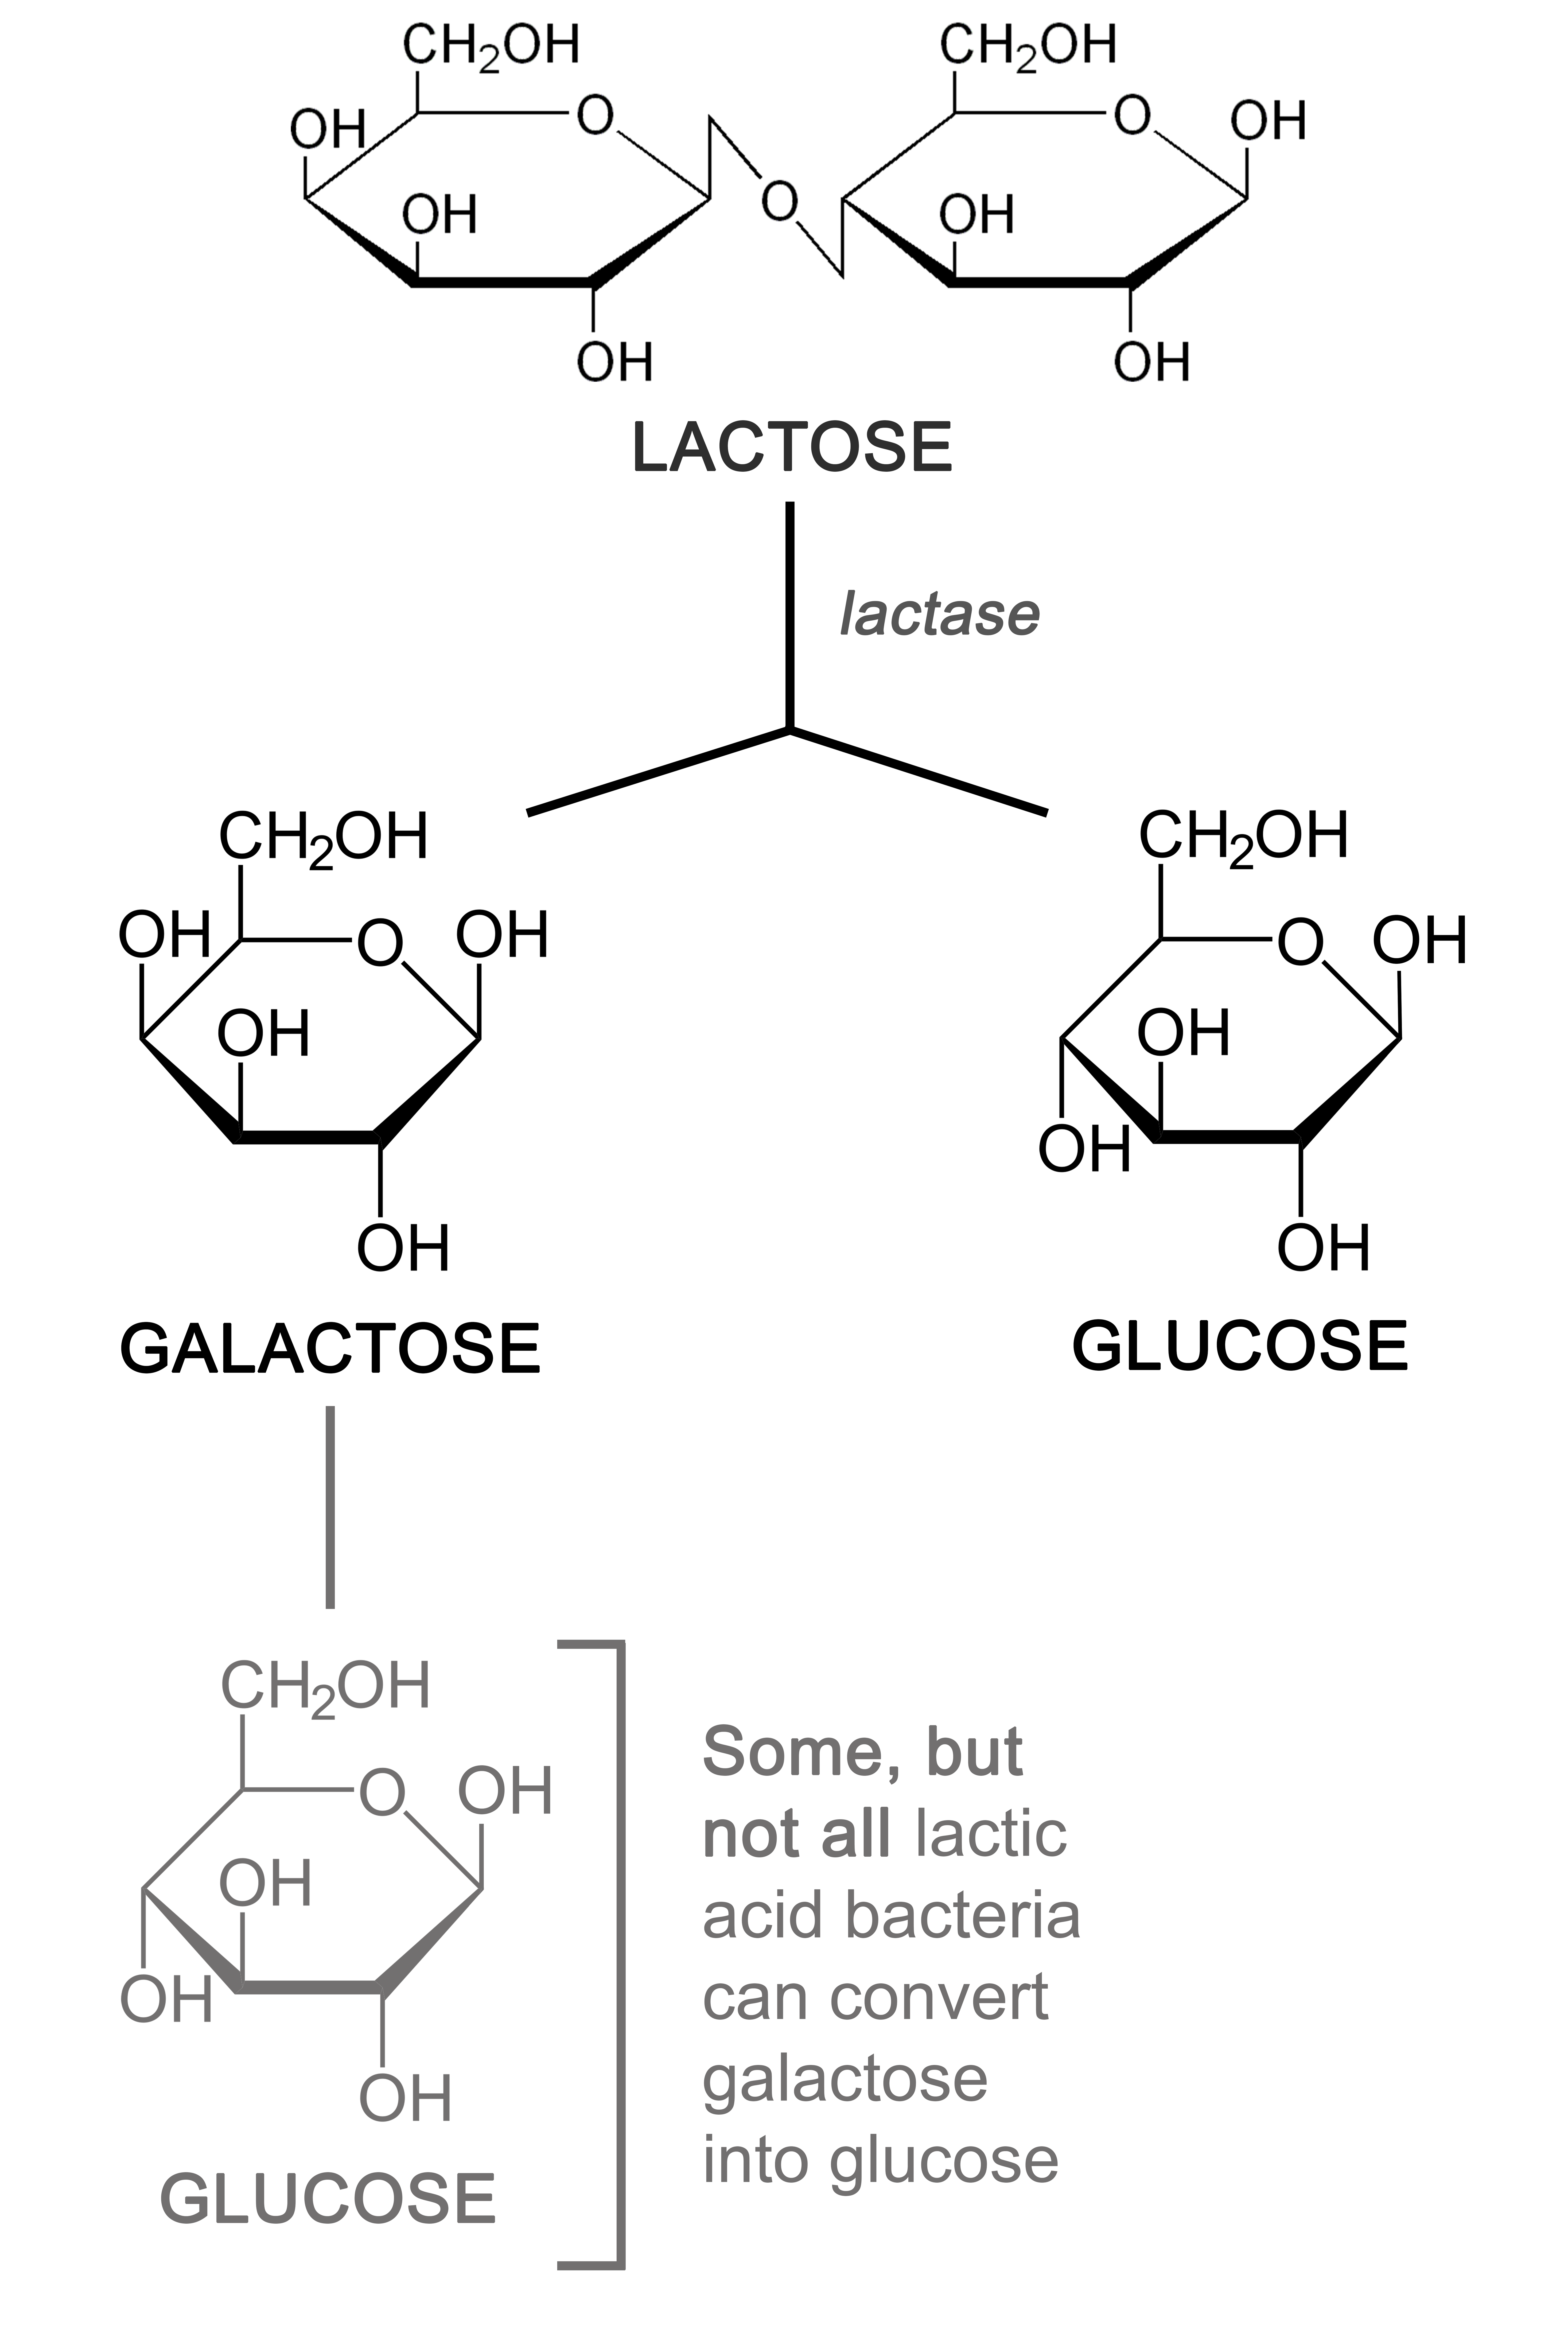 Lactose is broken down into galactose and glucose by bacteria with the enzyme lactase. Some bacteria are able to convert galactose into glucose.